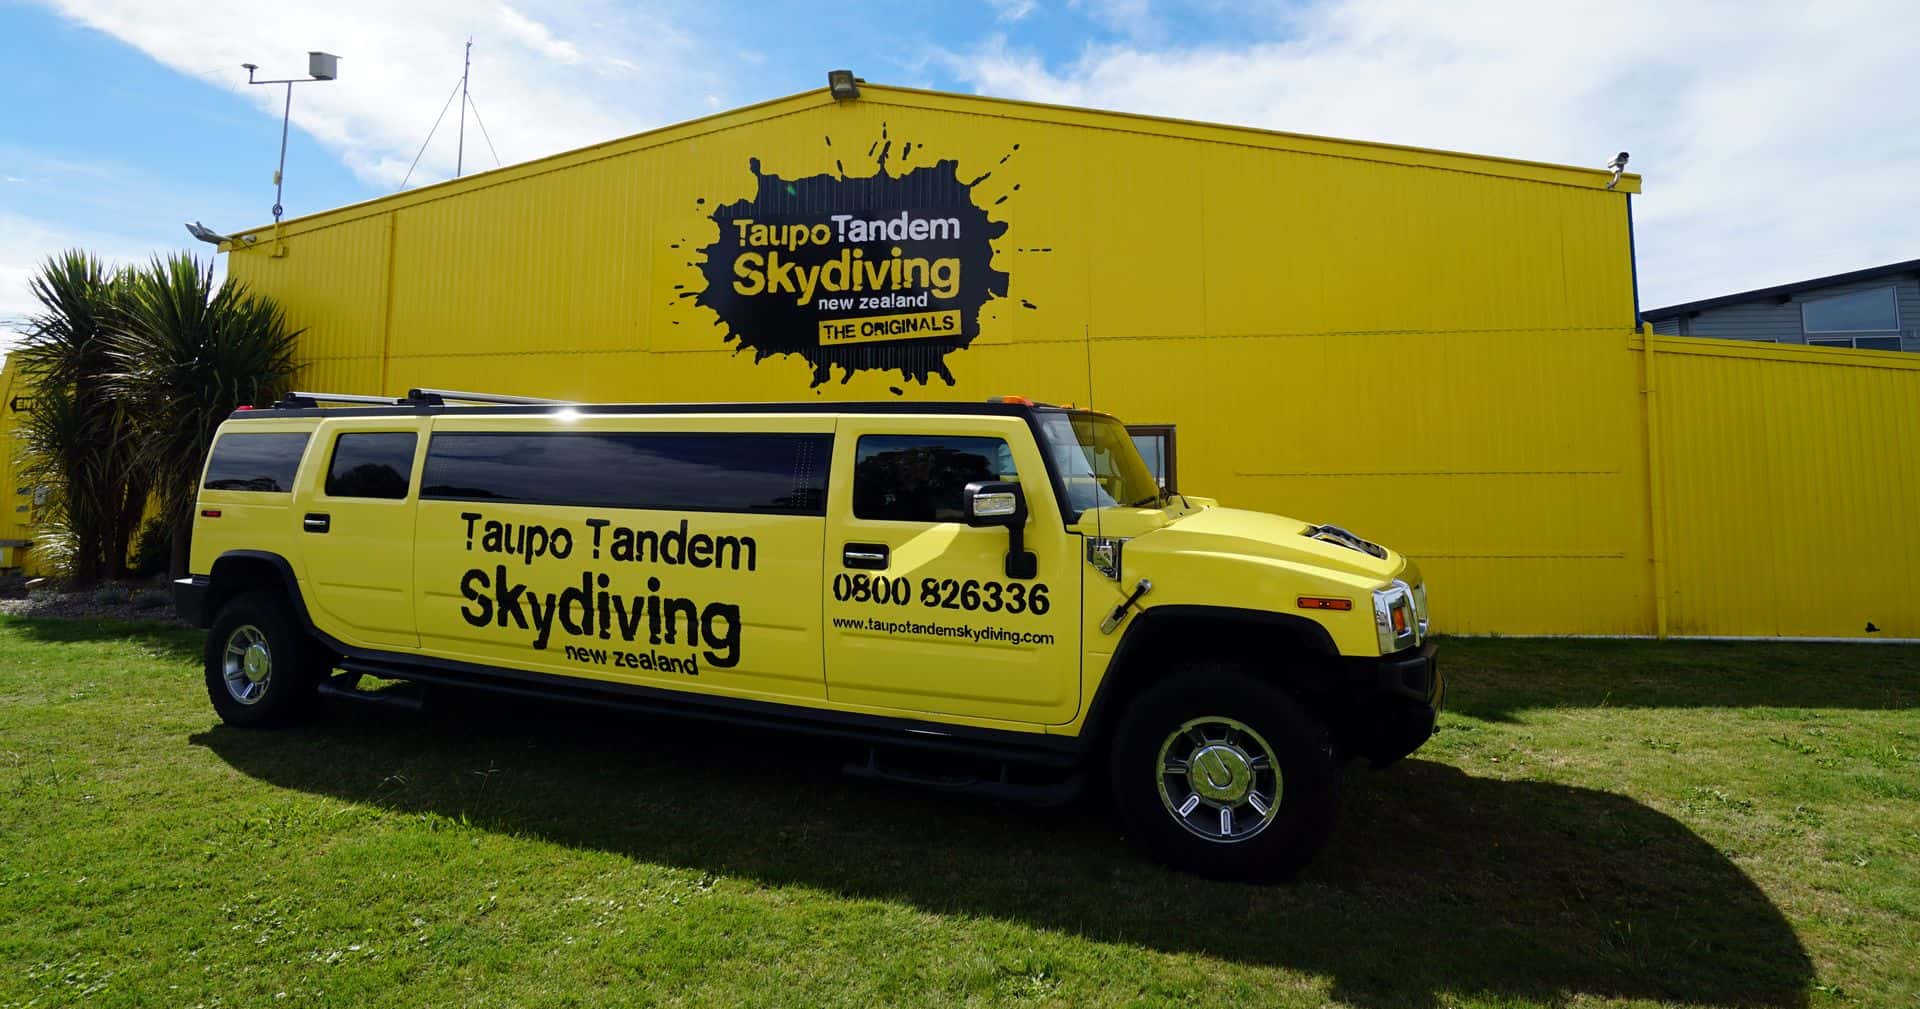 Limousine Hummer of Taupo Tandem Skydiving